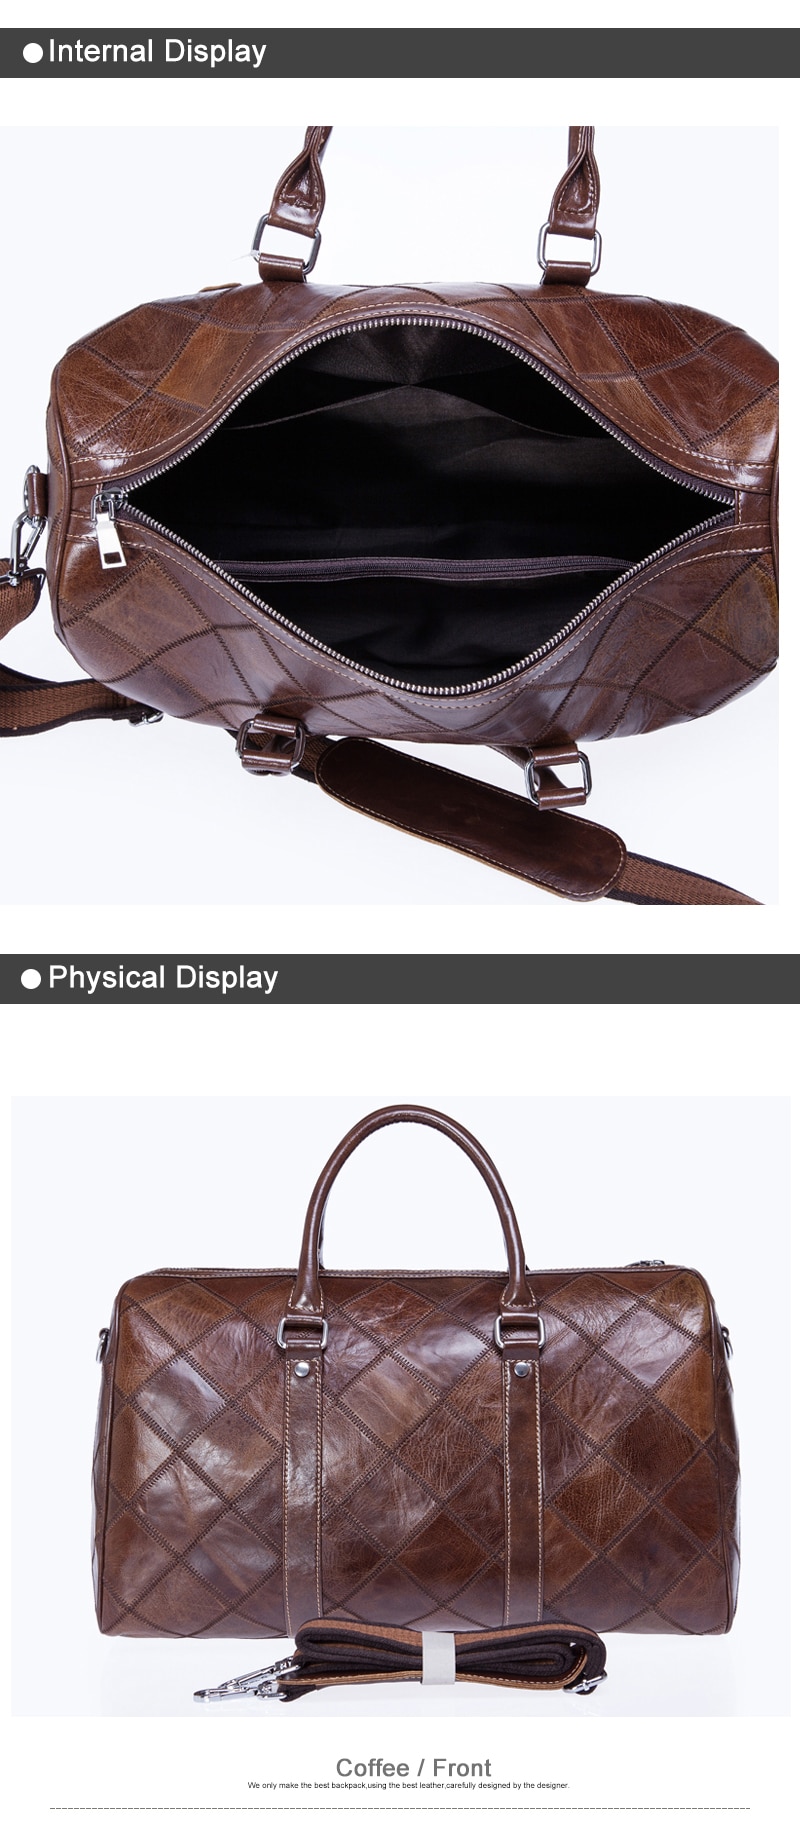 WESTAL-Mens-Luggage-Travel-Bags-Genuine-Leather-Duffle-Bag-Suitcase-and-Travel-Tote-Carry-on-Luggage-32798190847